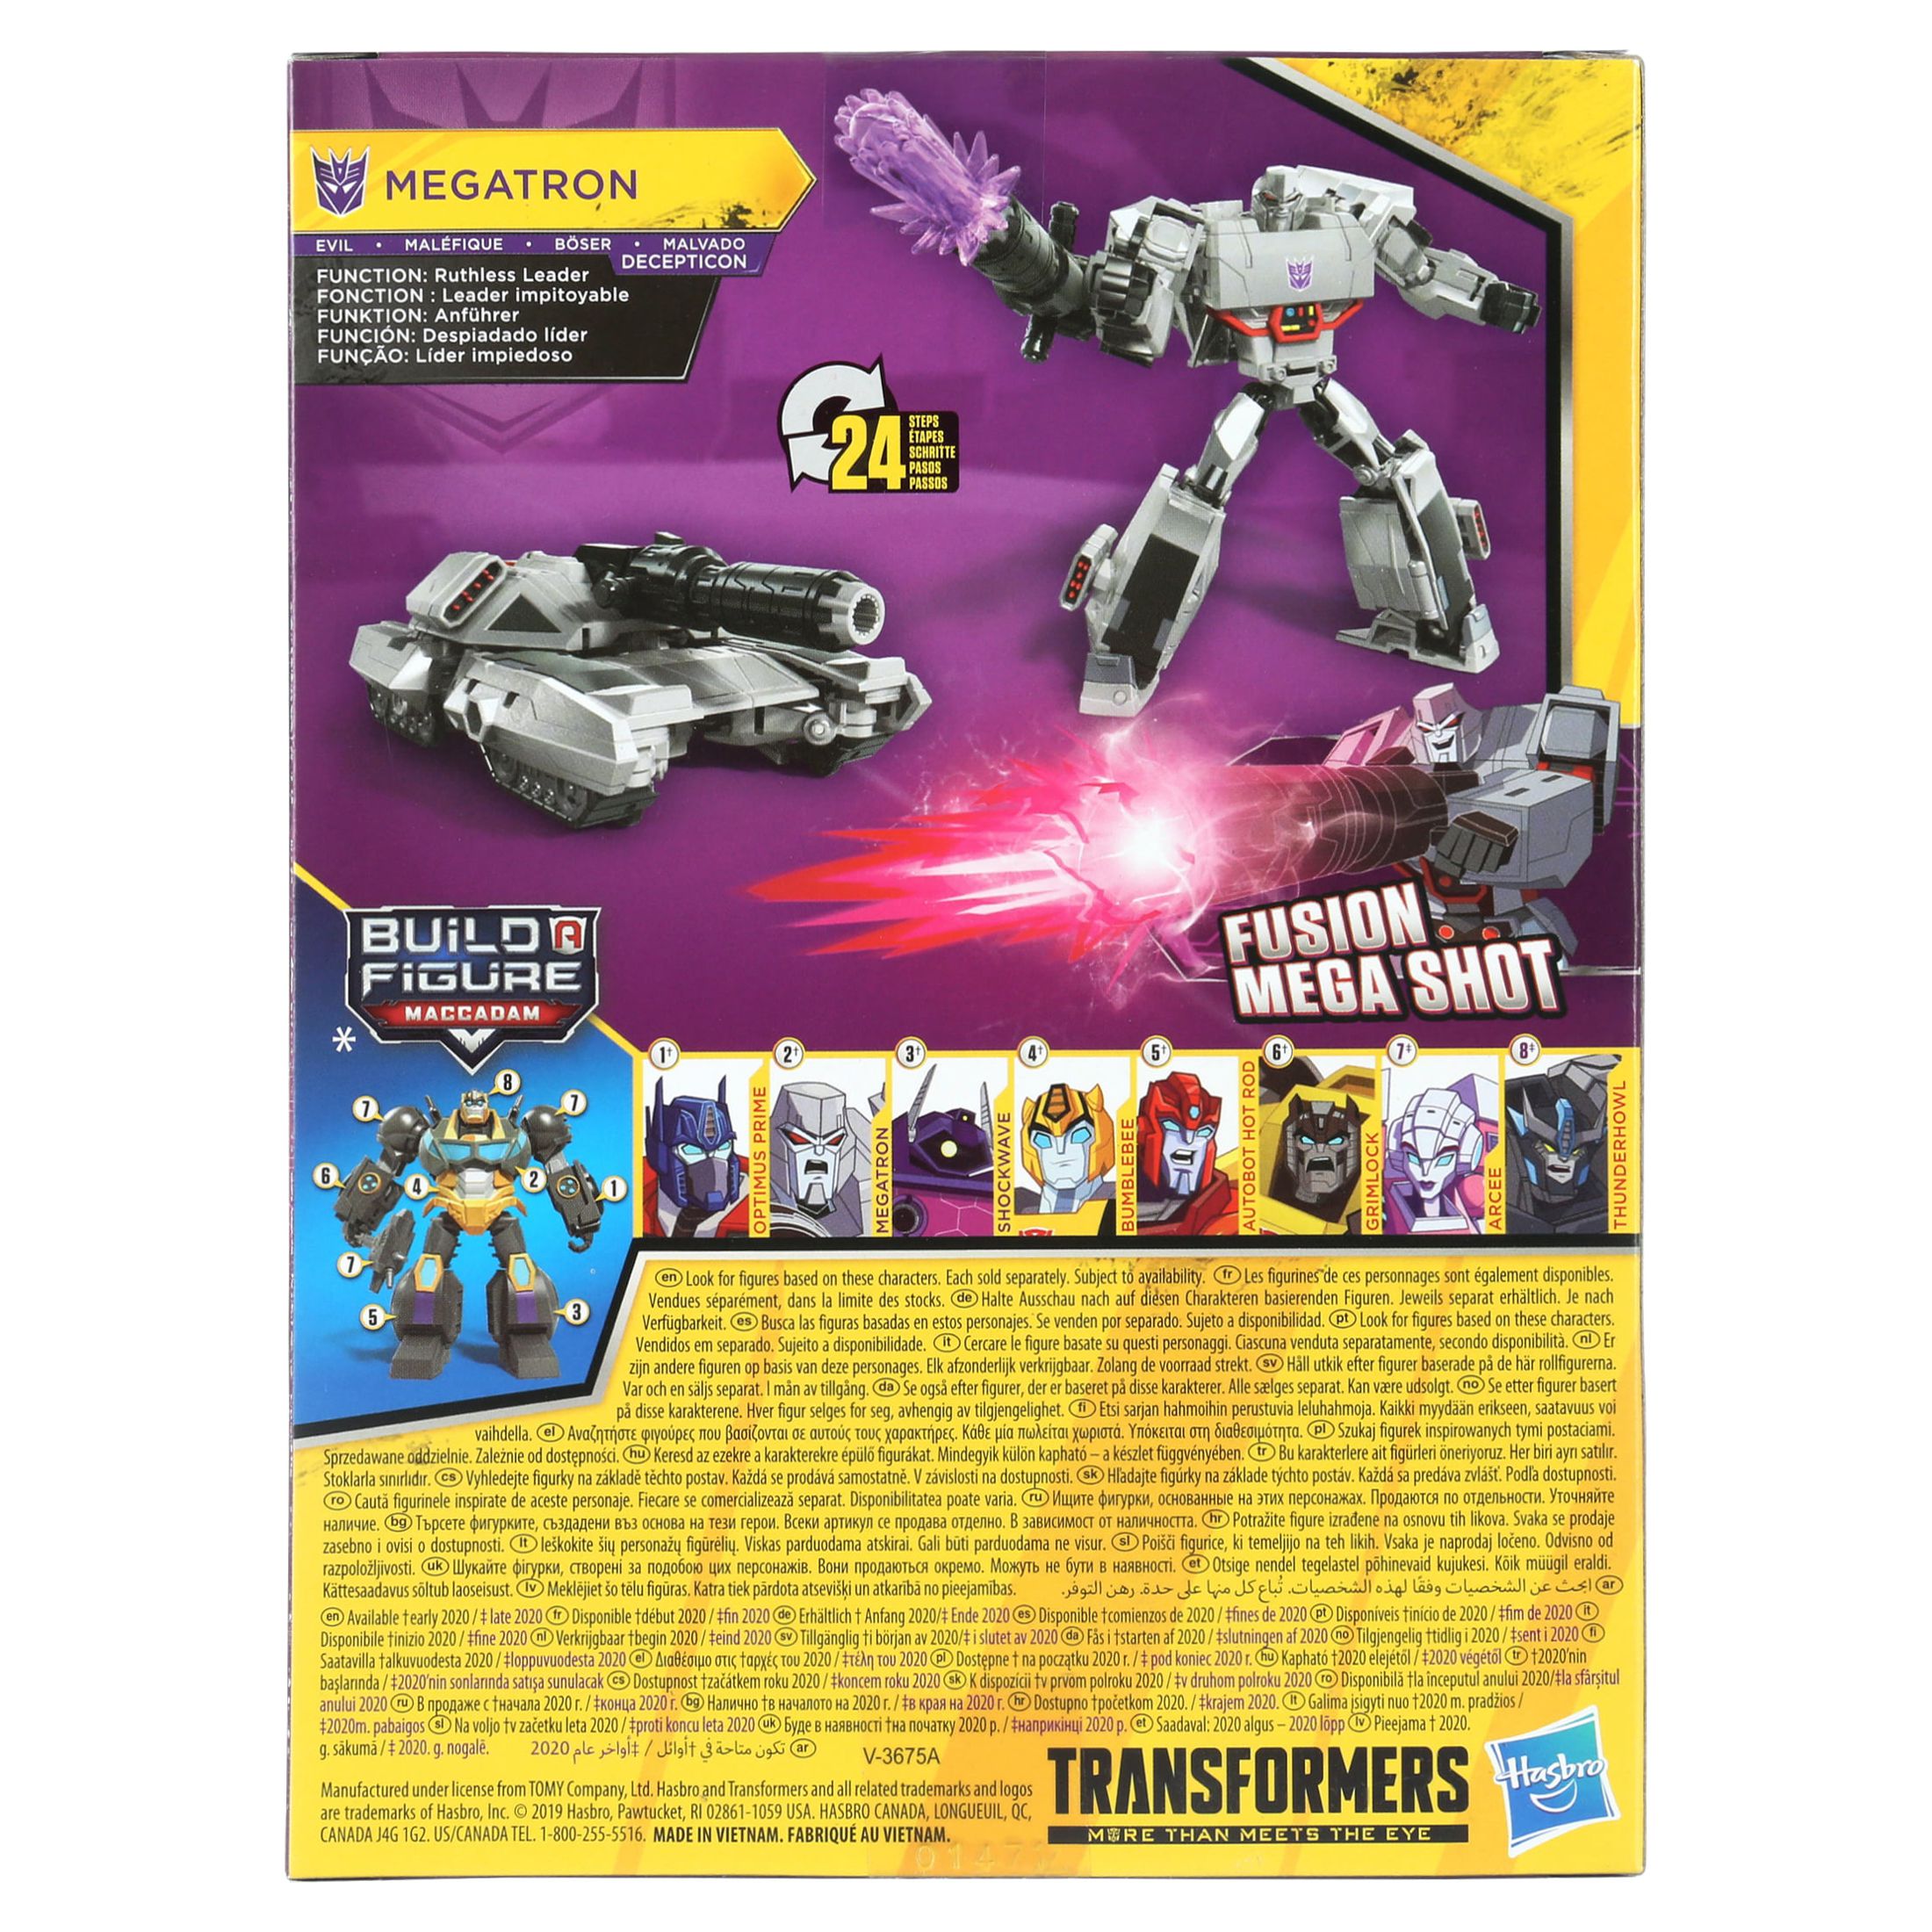 Transformers: Bumblebee Cyberverse Adventures Megatron Kids Toy Action Figure for Boys and Girls (5") - image 3 of 8